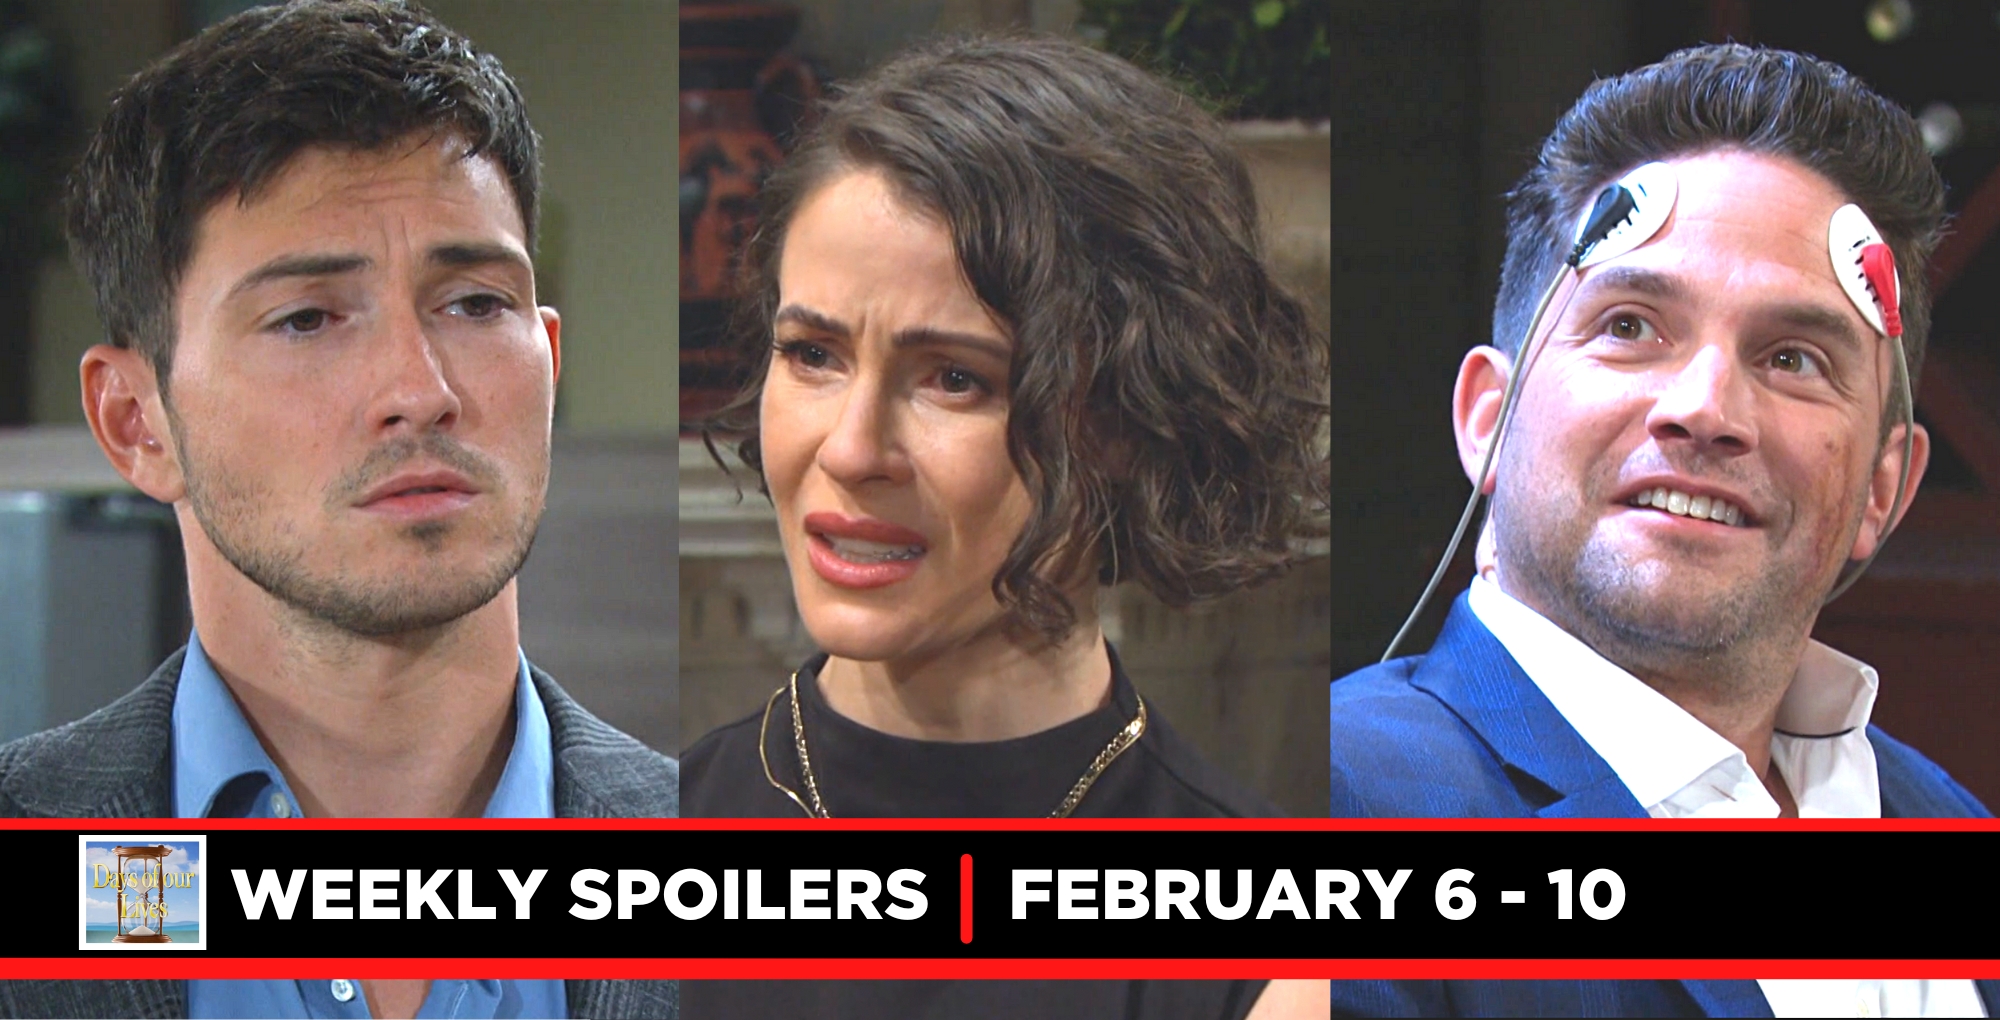 days of our lives spoilers for the week of February 6-February 10, 2023, three images alex, sarah, and stefan